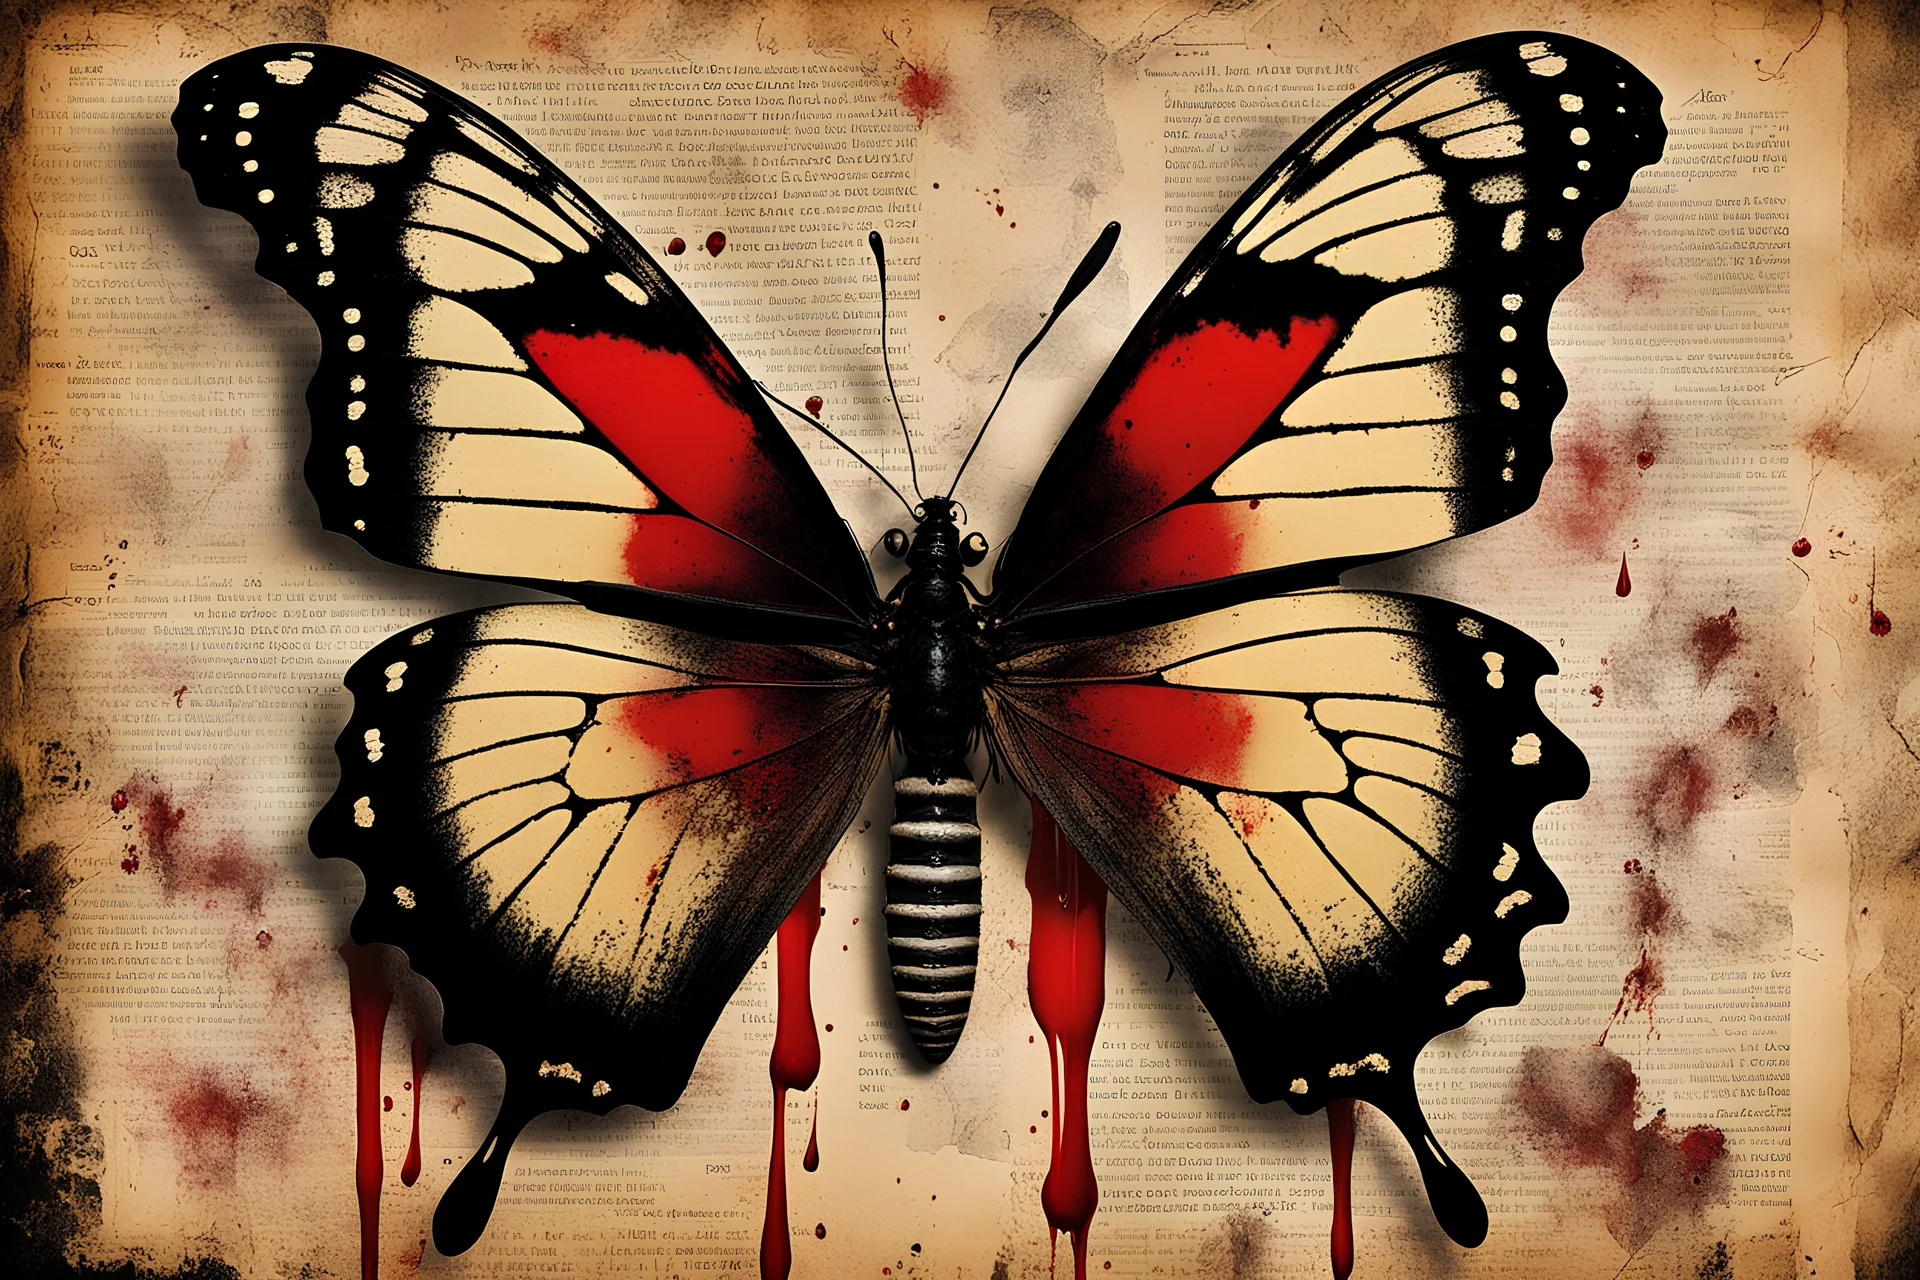 a bleeding black velvet butterfly is pinned on a large nail on an old dirty wall, red blood flowing from the butterfly's wings and body, drops of blood on the wall, old yellowed torn newspaper clippings on the wall, dirty fingerprints, cracked old grayed white paint, intricate details, sharp focus , cinematic, surreal, frighteningly beautiful, perfect composition